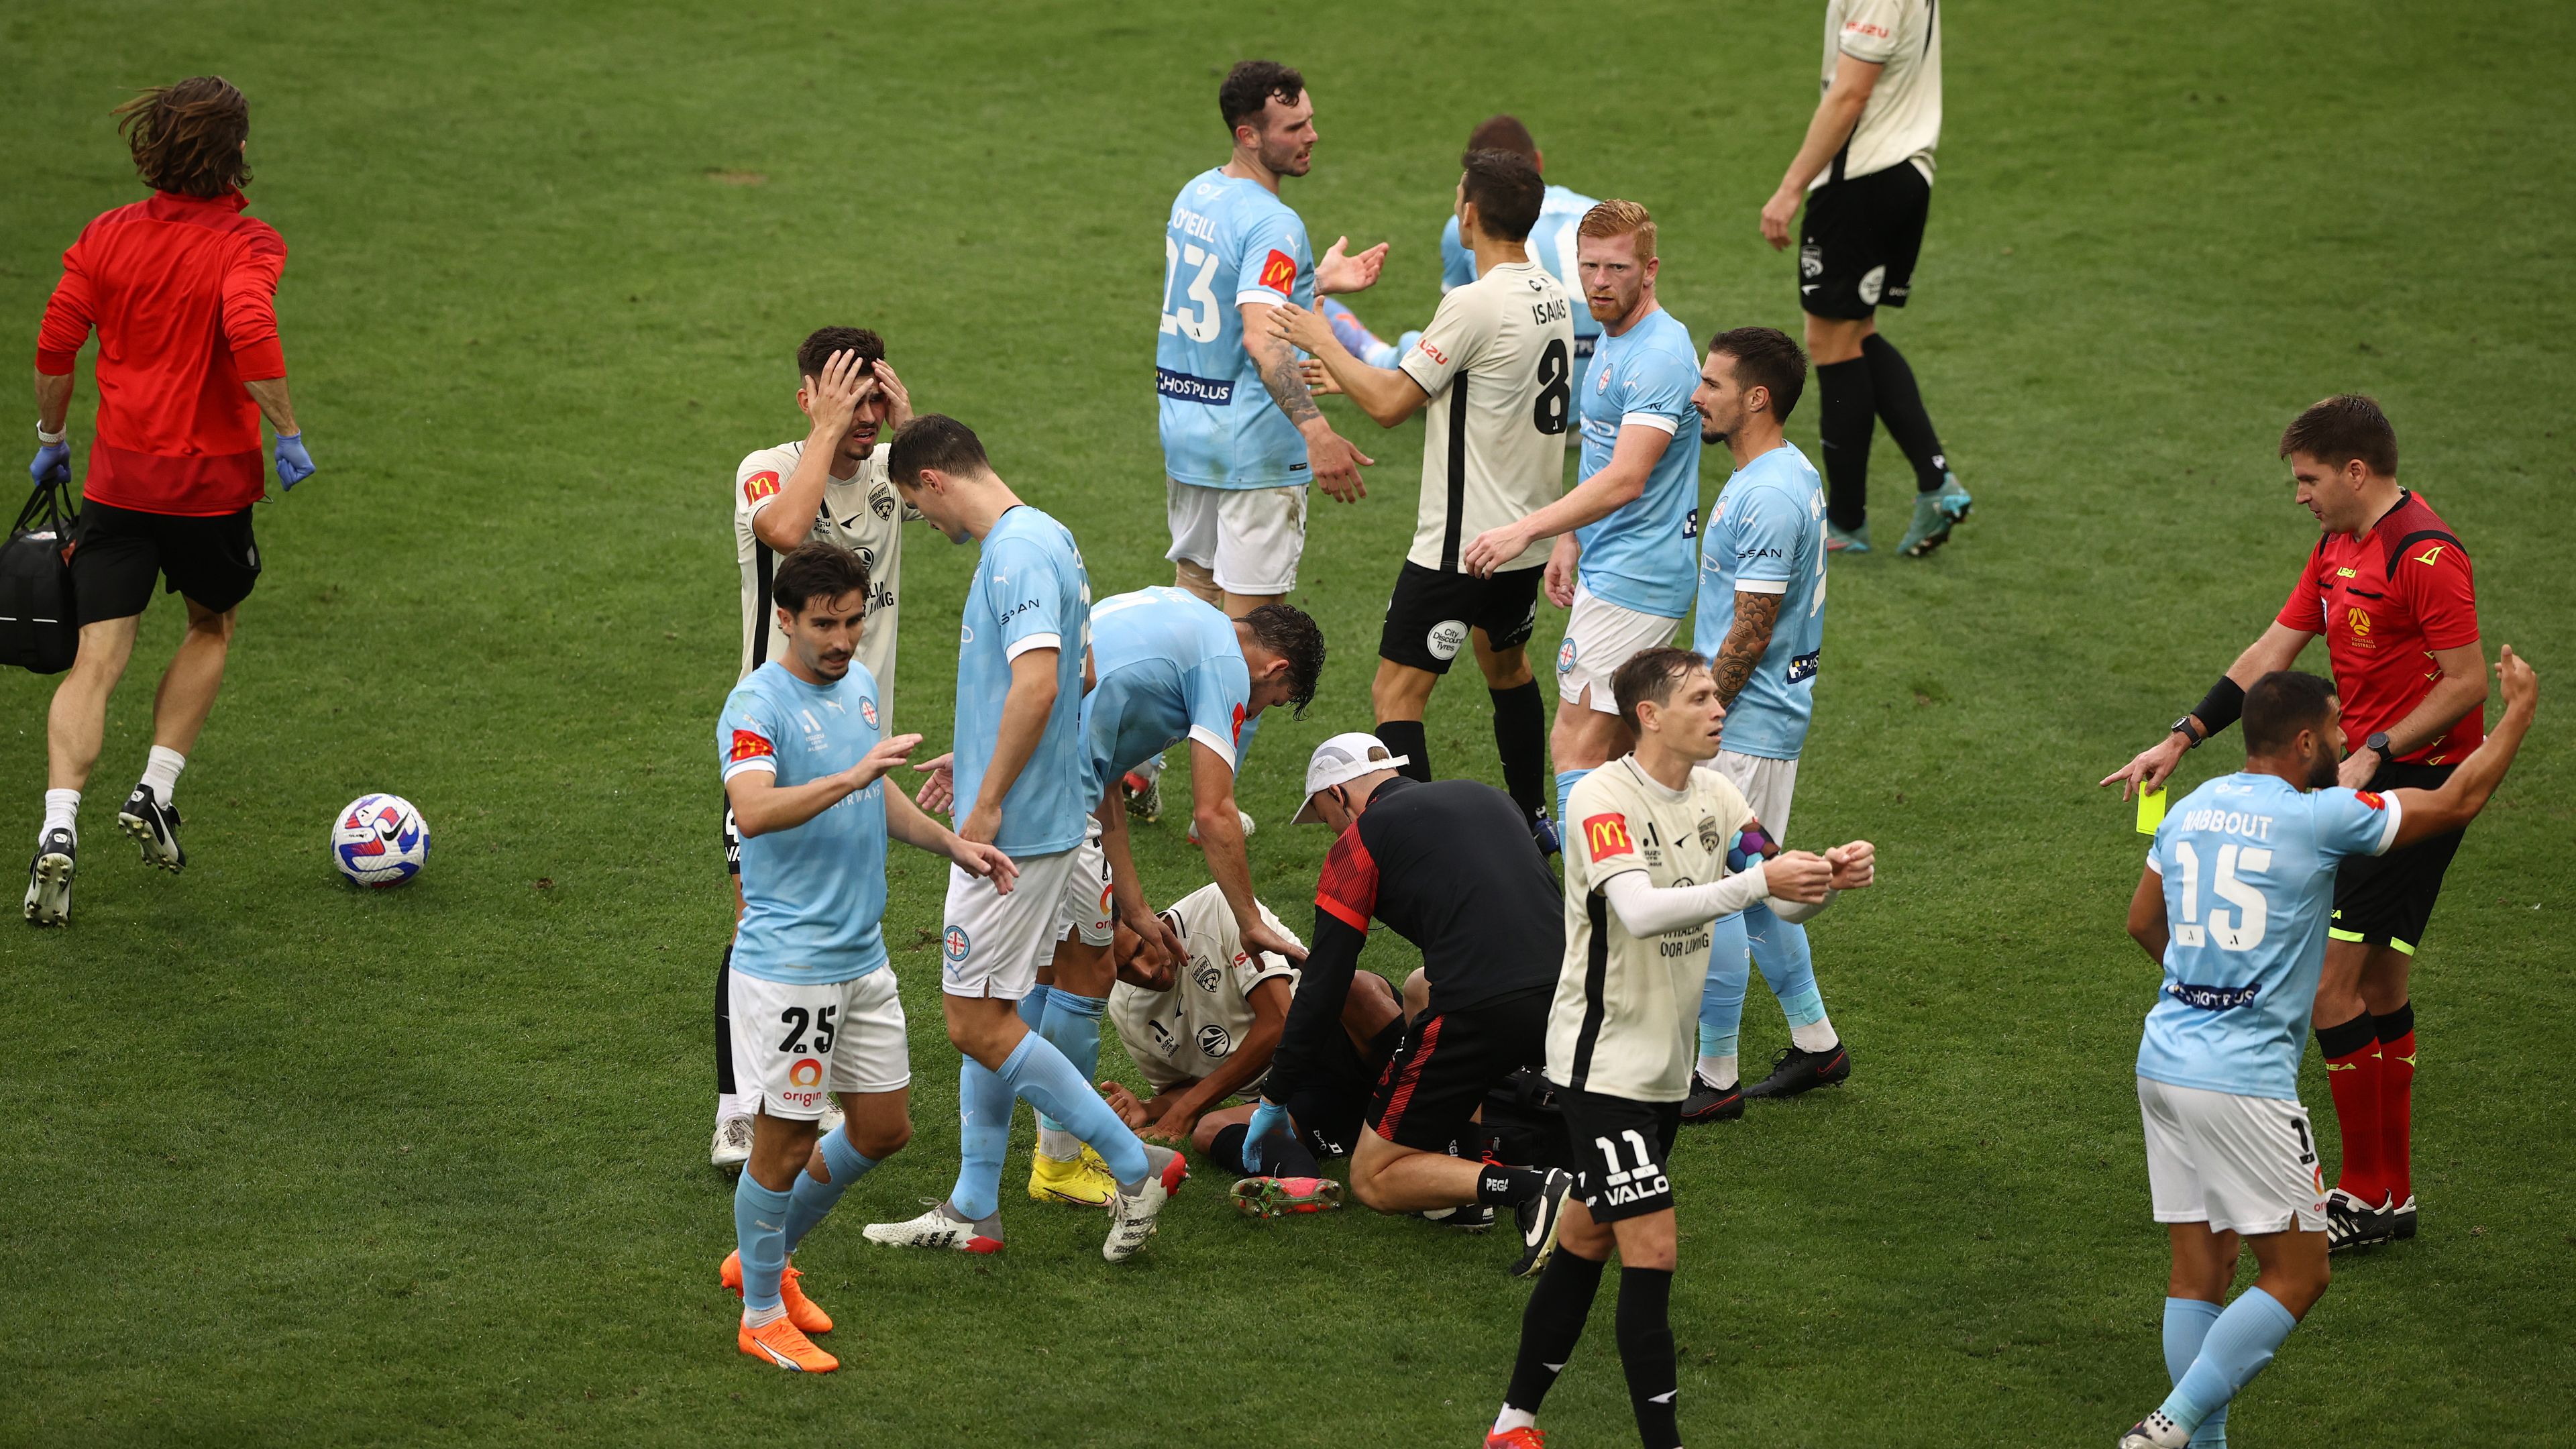 Players in tears, commentators 'in shock' after horror injury halts A-League game